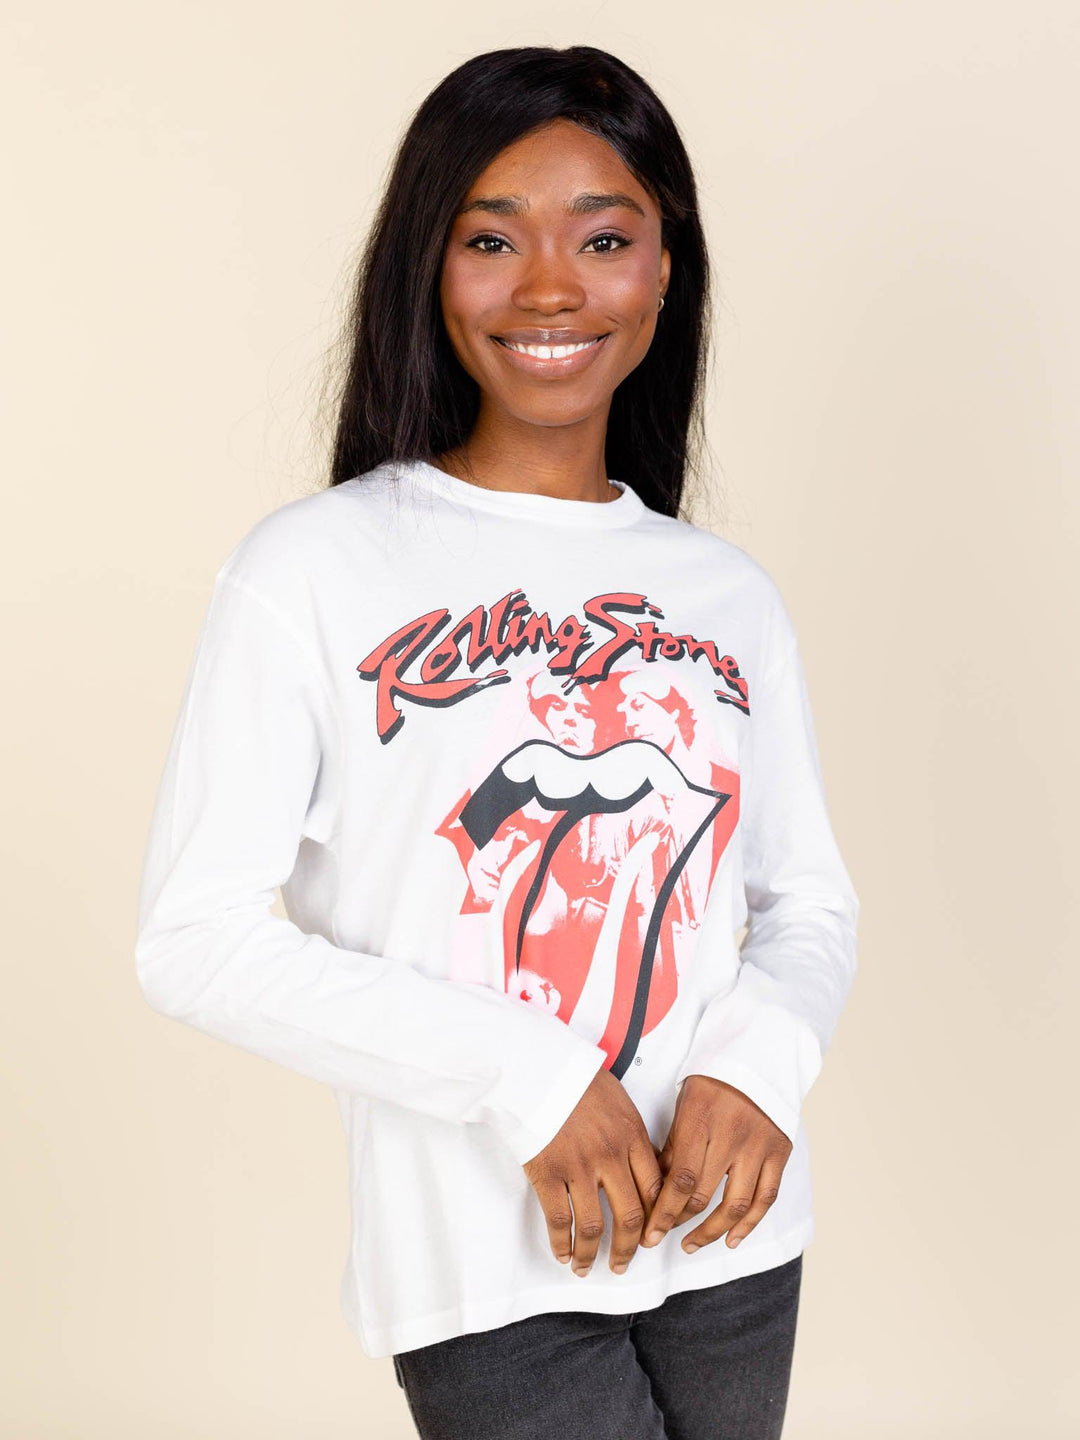 Daydreamer-Daydreamer Rolling Stones Band Lick Crew Long Sleeve - Leela and Lavender